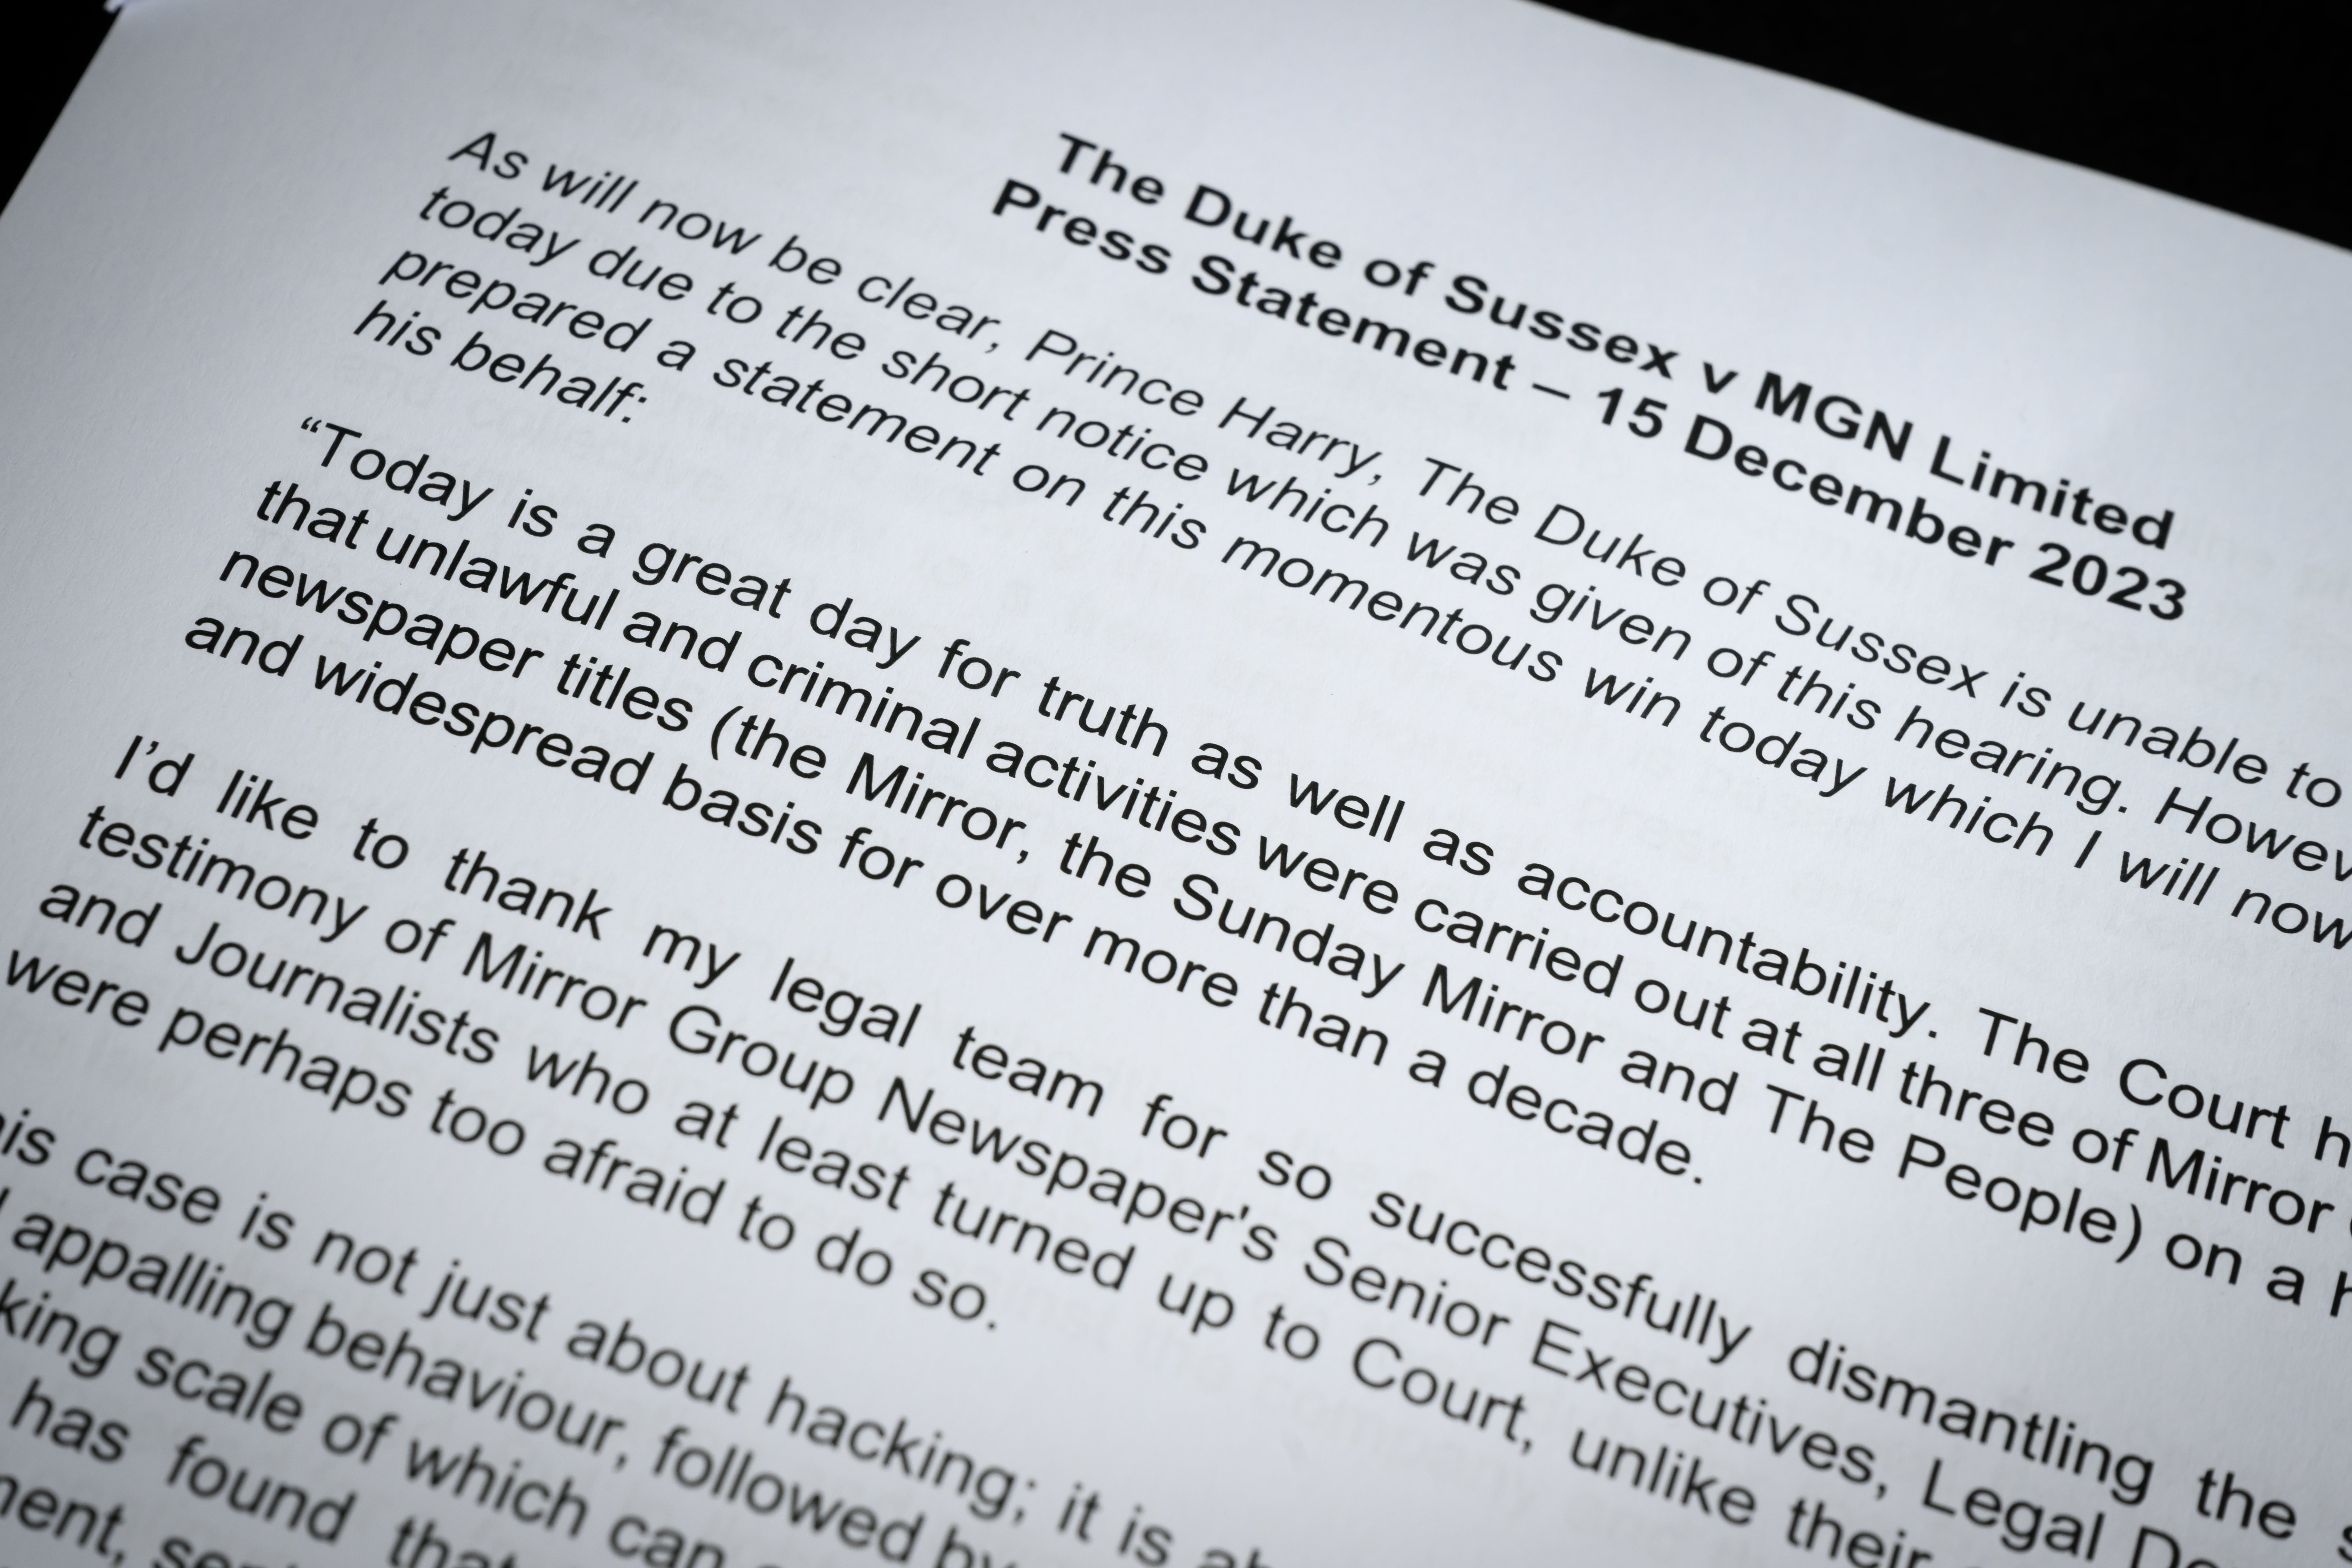 A detail view of a printed copy of a written statement by Prince Harry which was distributed to the media following the ruling in his favour in a lawsuit against the Mirror Group on Friday